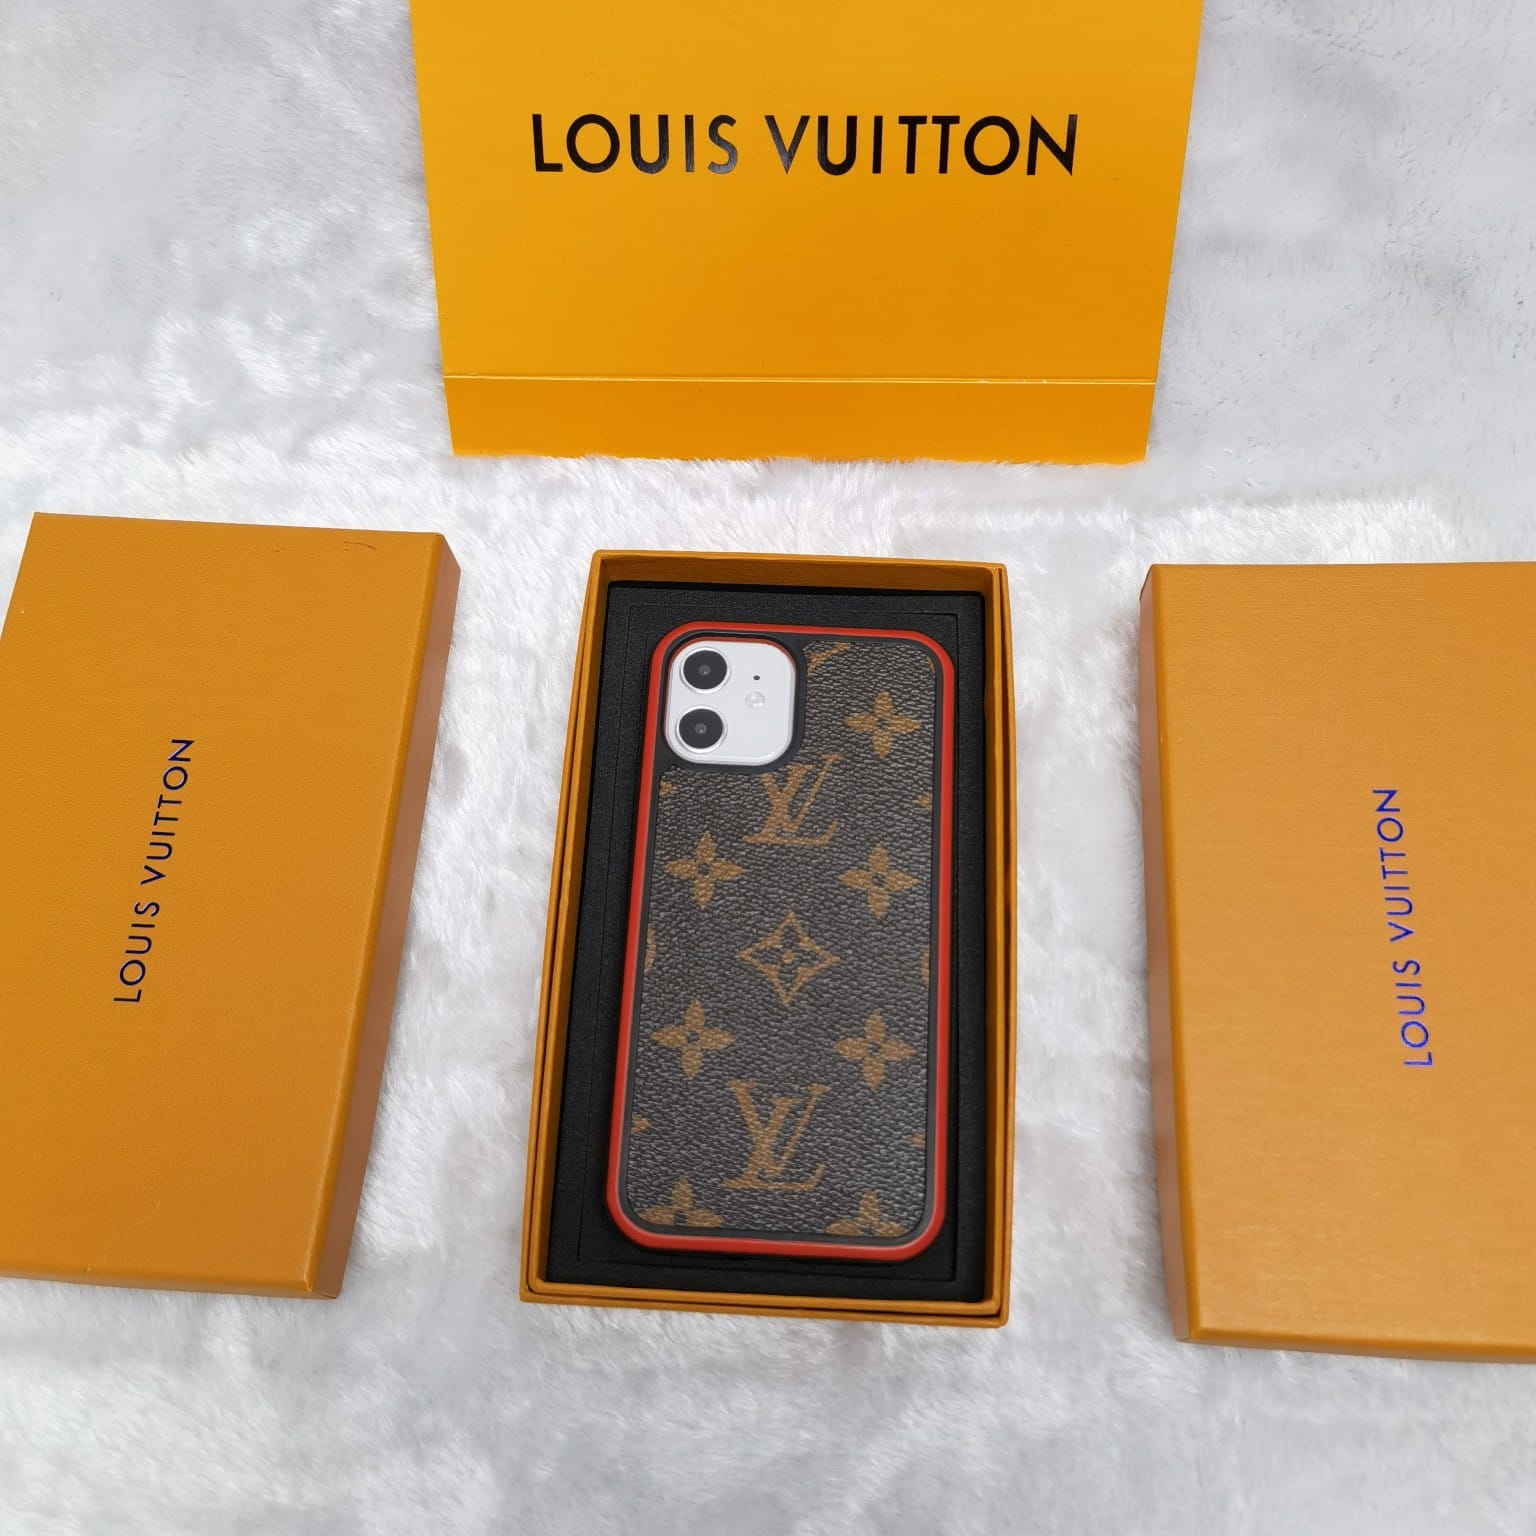 Branded phone cases for all phones